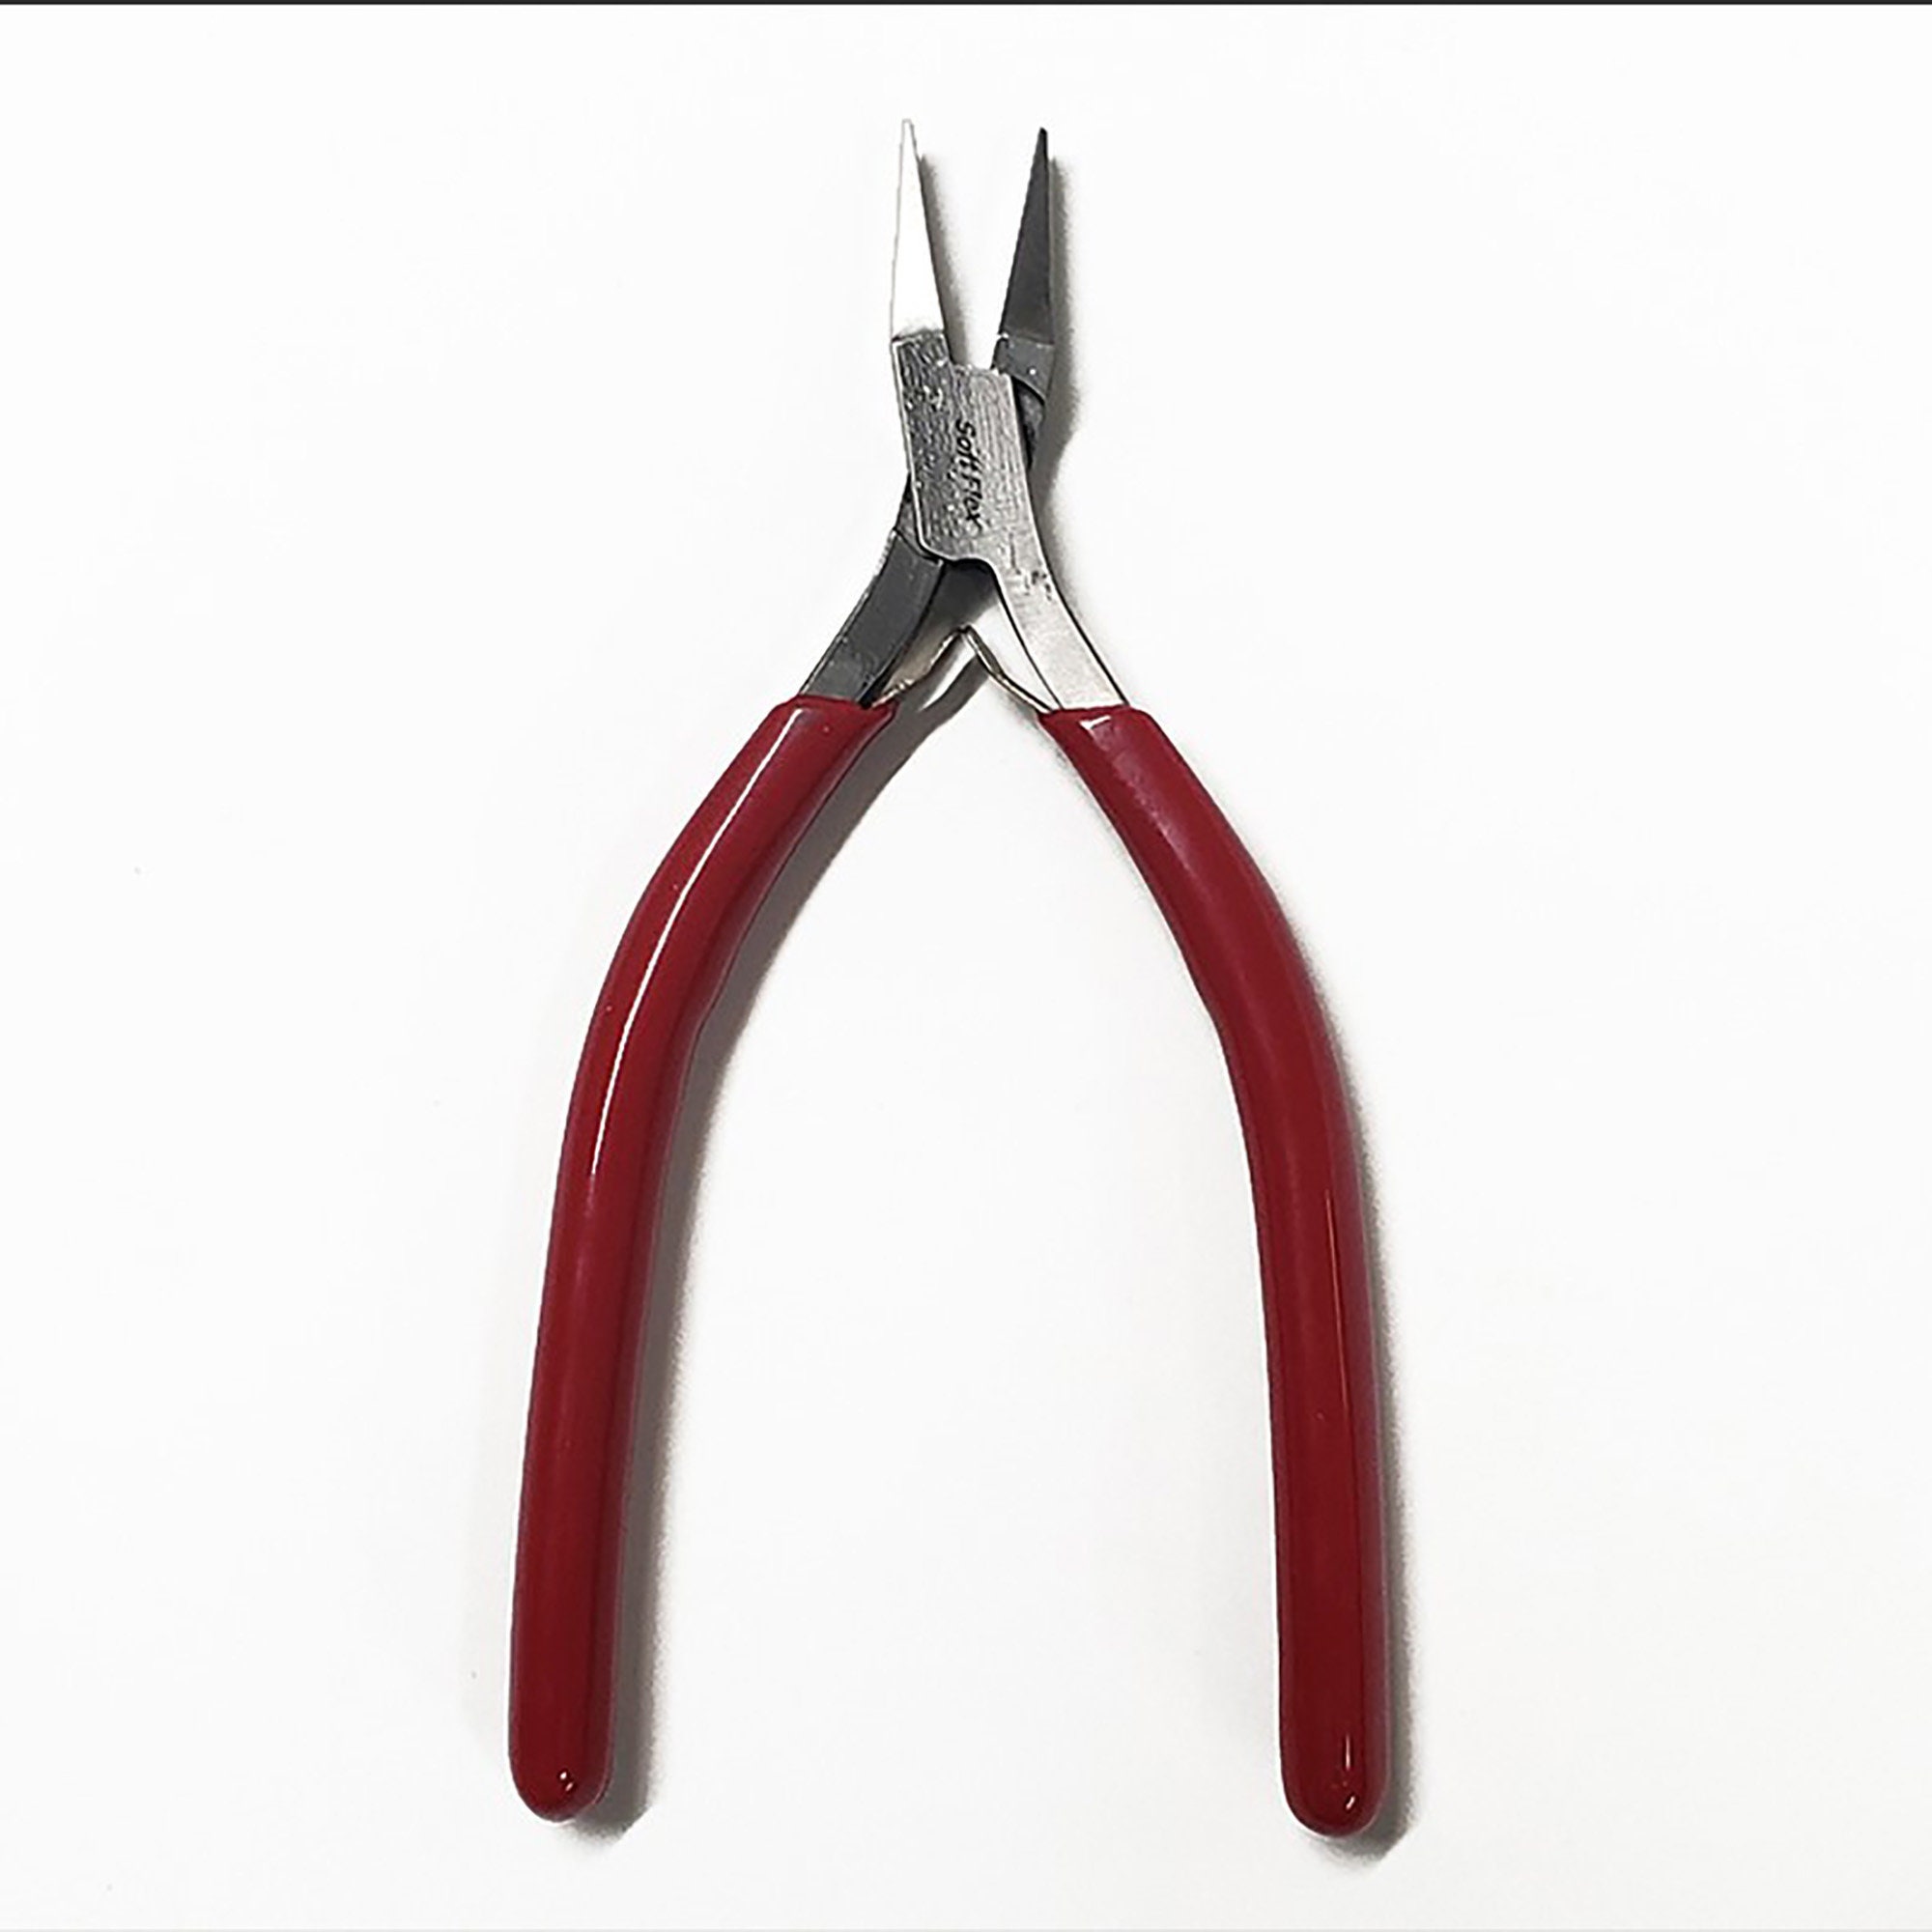 5-1/2 Parallel-Action Pliers with Nylon Jaws Non-Marring Jewelry Making  Metal Wire Bending Forming Tool - PLR-864.00